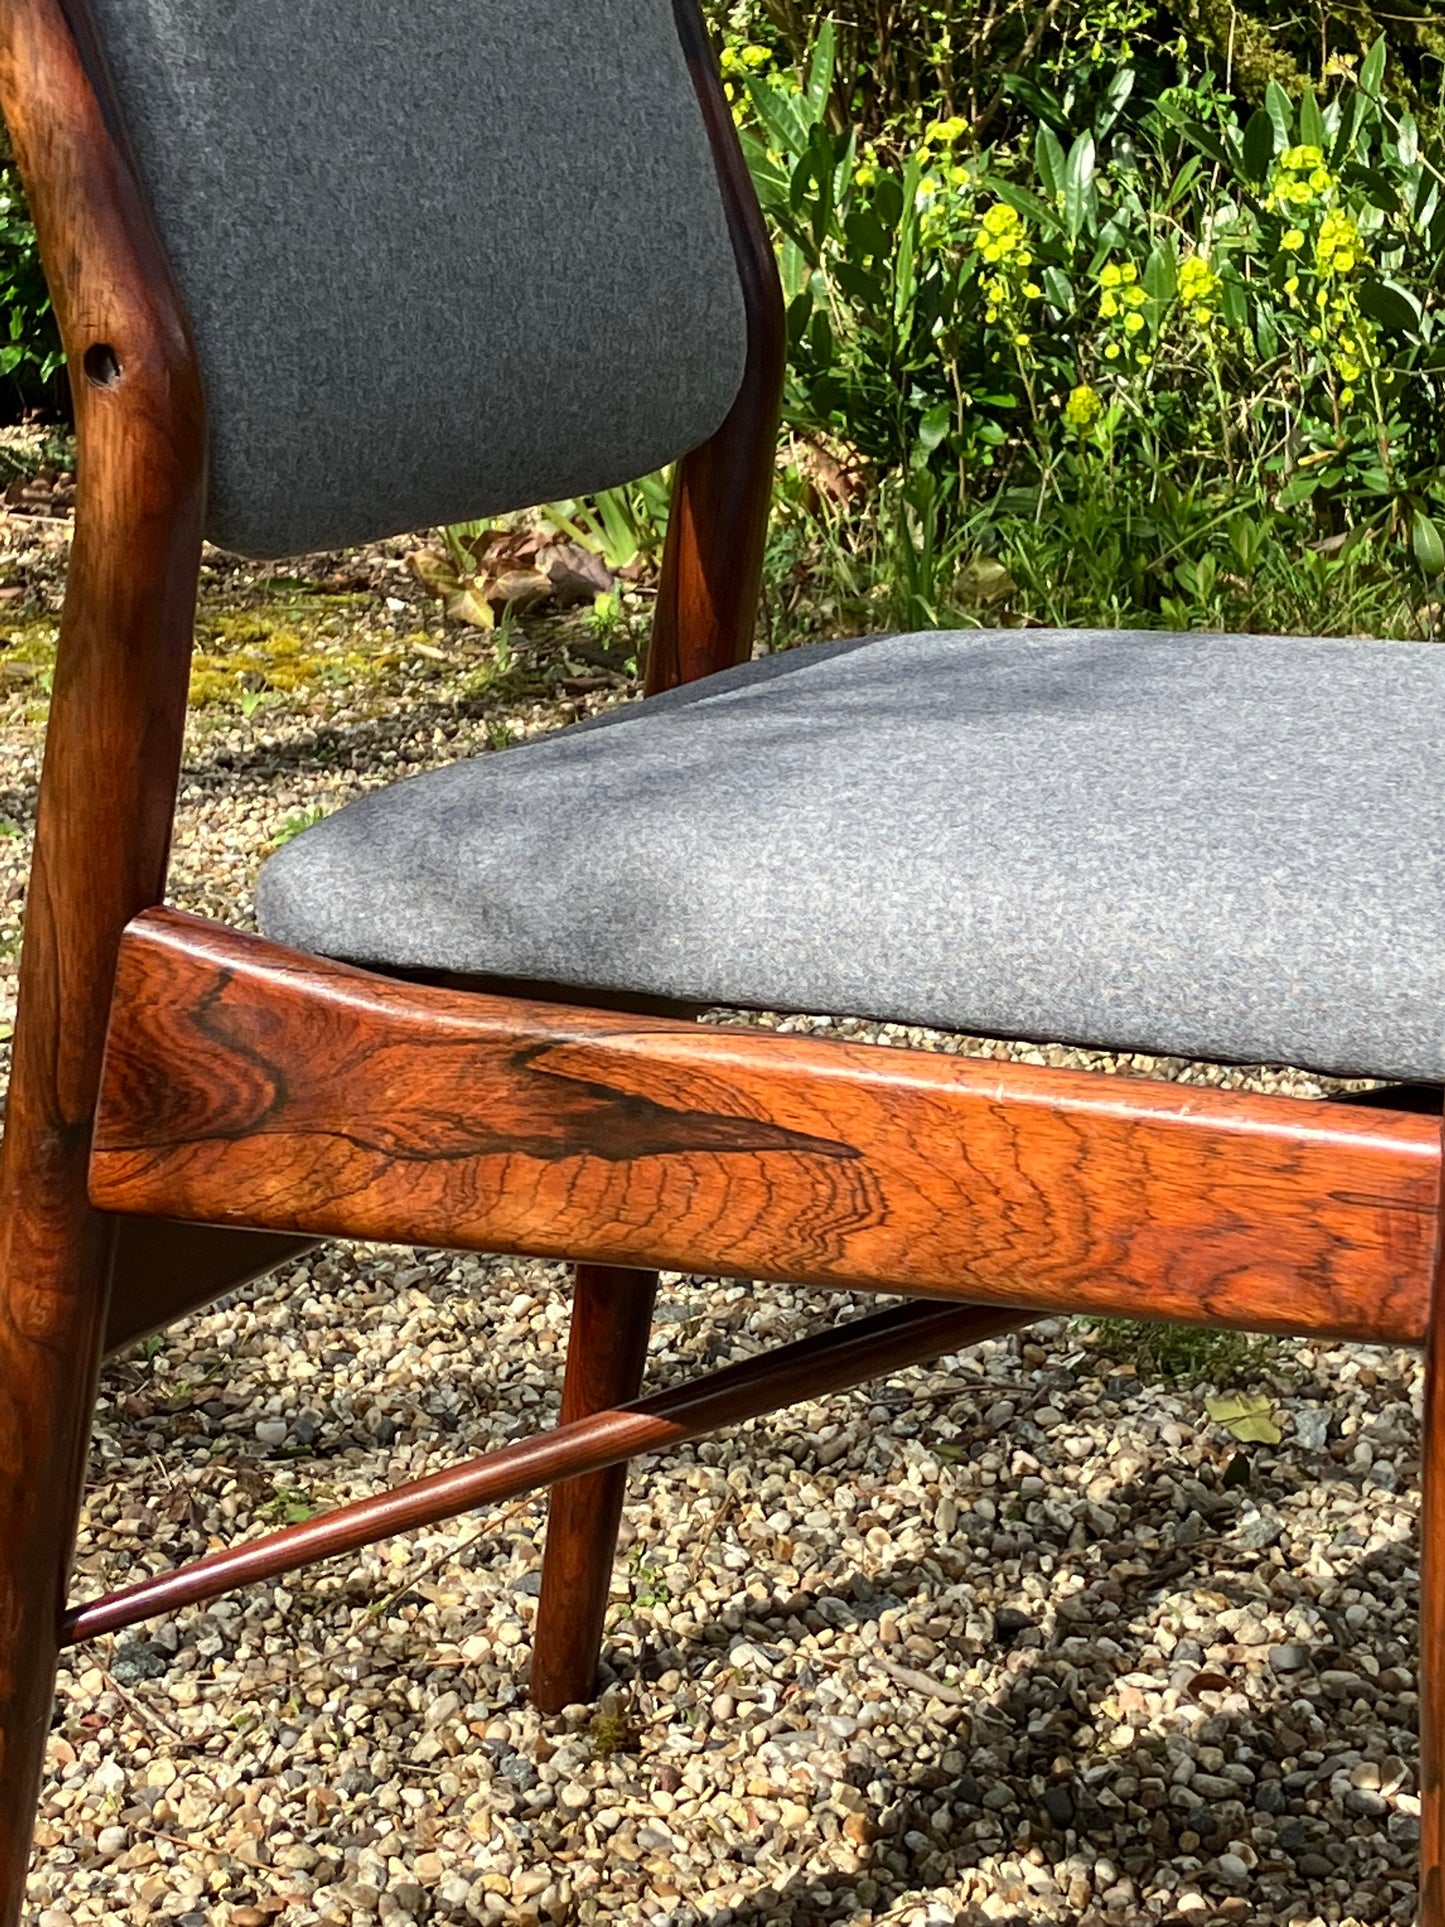 Vintage Mid Century Rosewood Dining Chairs from the 1960s